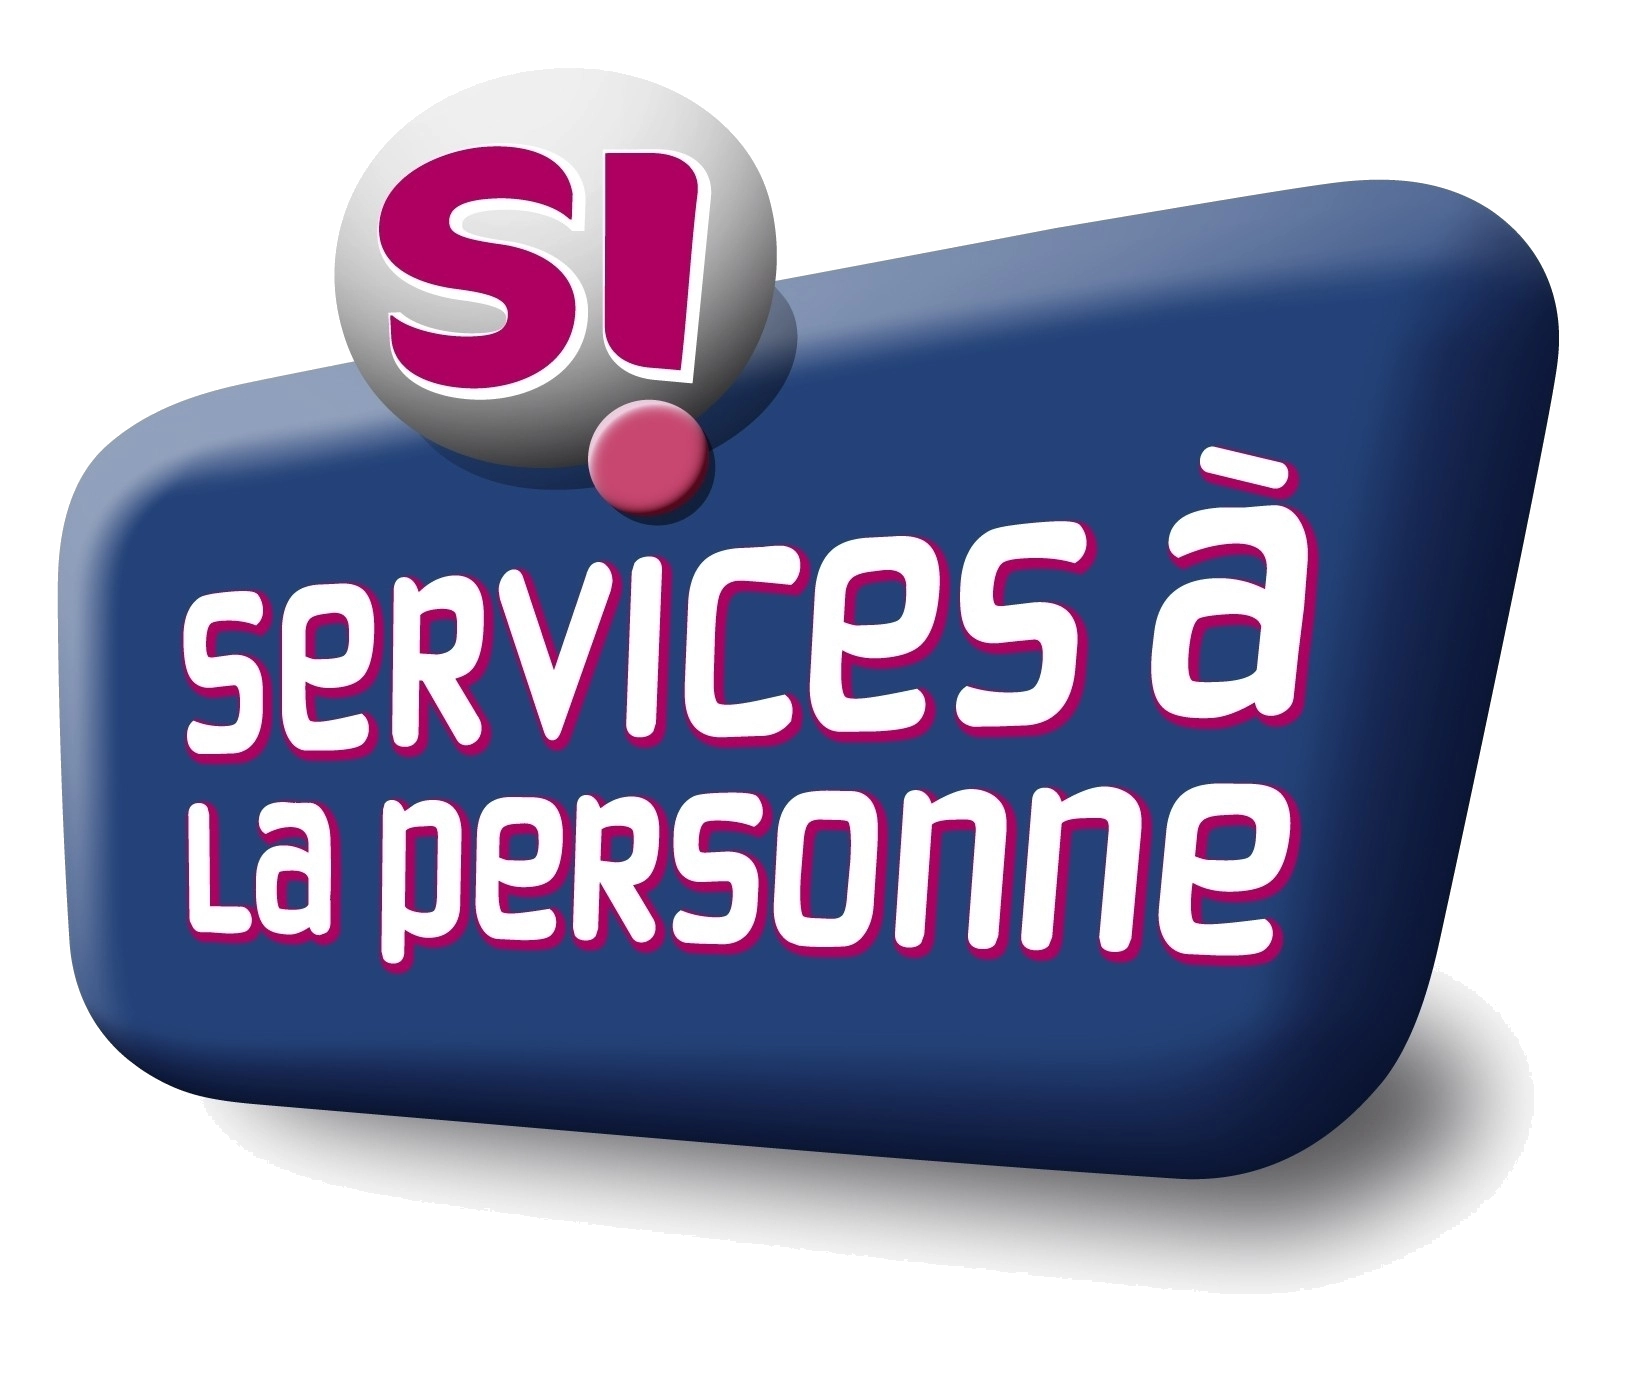 servicesalapersonne